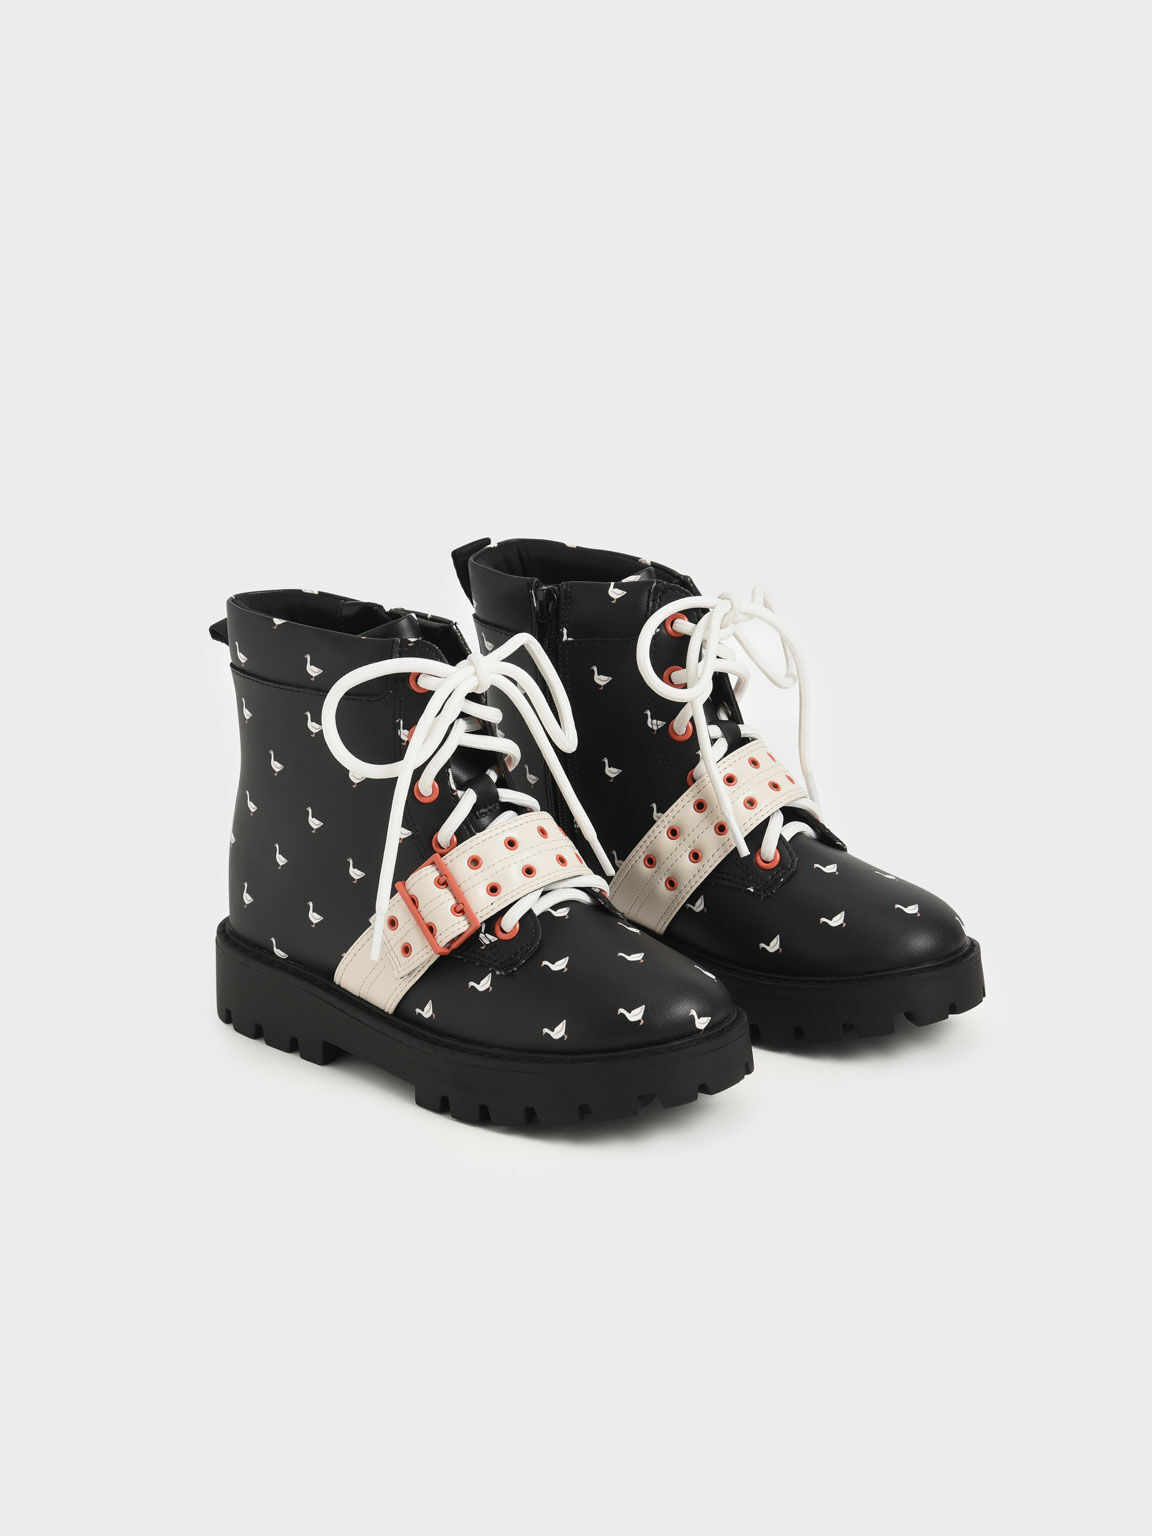 Girls' Printed Lace-Up Ankle Boots, Black Textured, hi-res